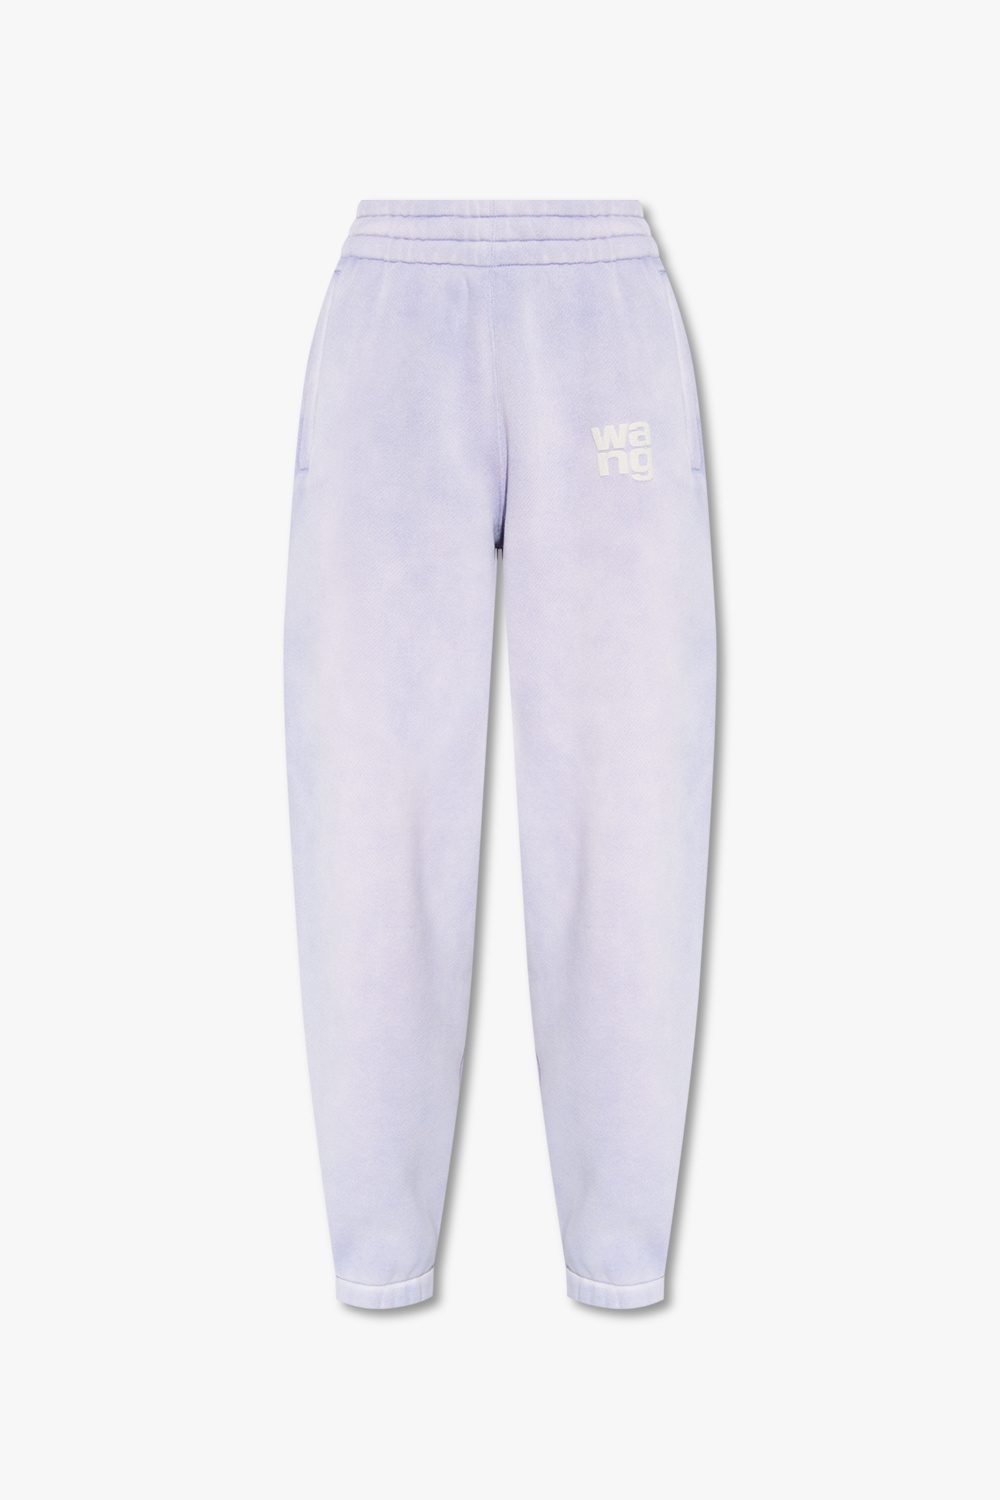 Purple Sweatpants with logo T by Alexander Wang - Leggings The North Face  New Flex high Rise 7 8 verde mulher - IetpShops Switzerland